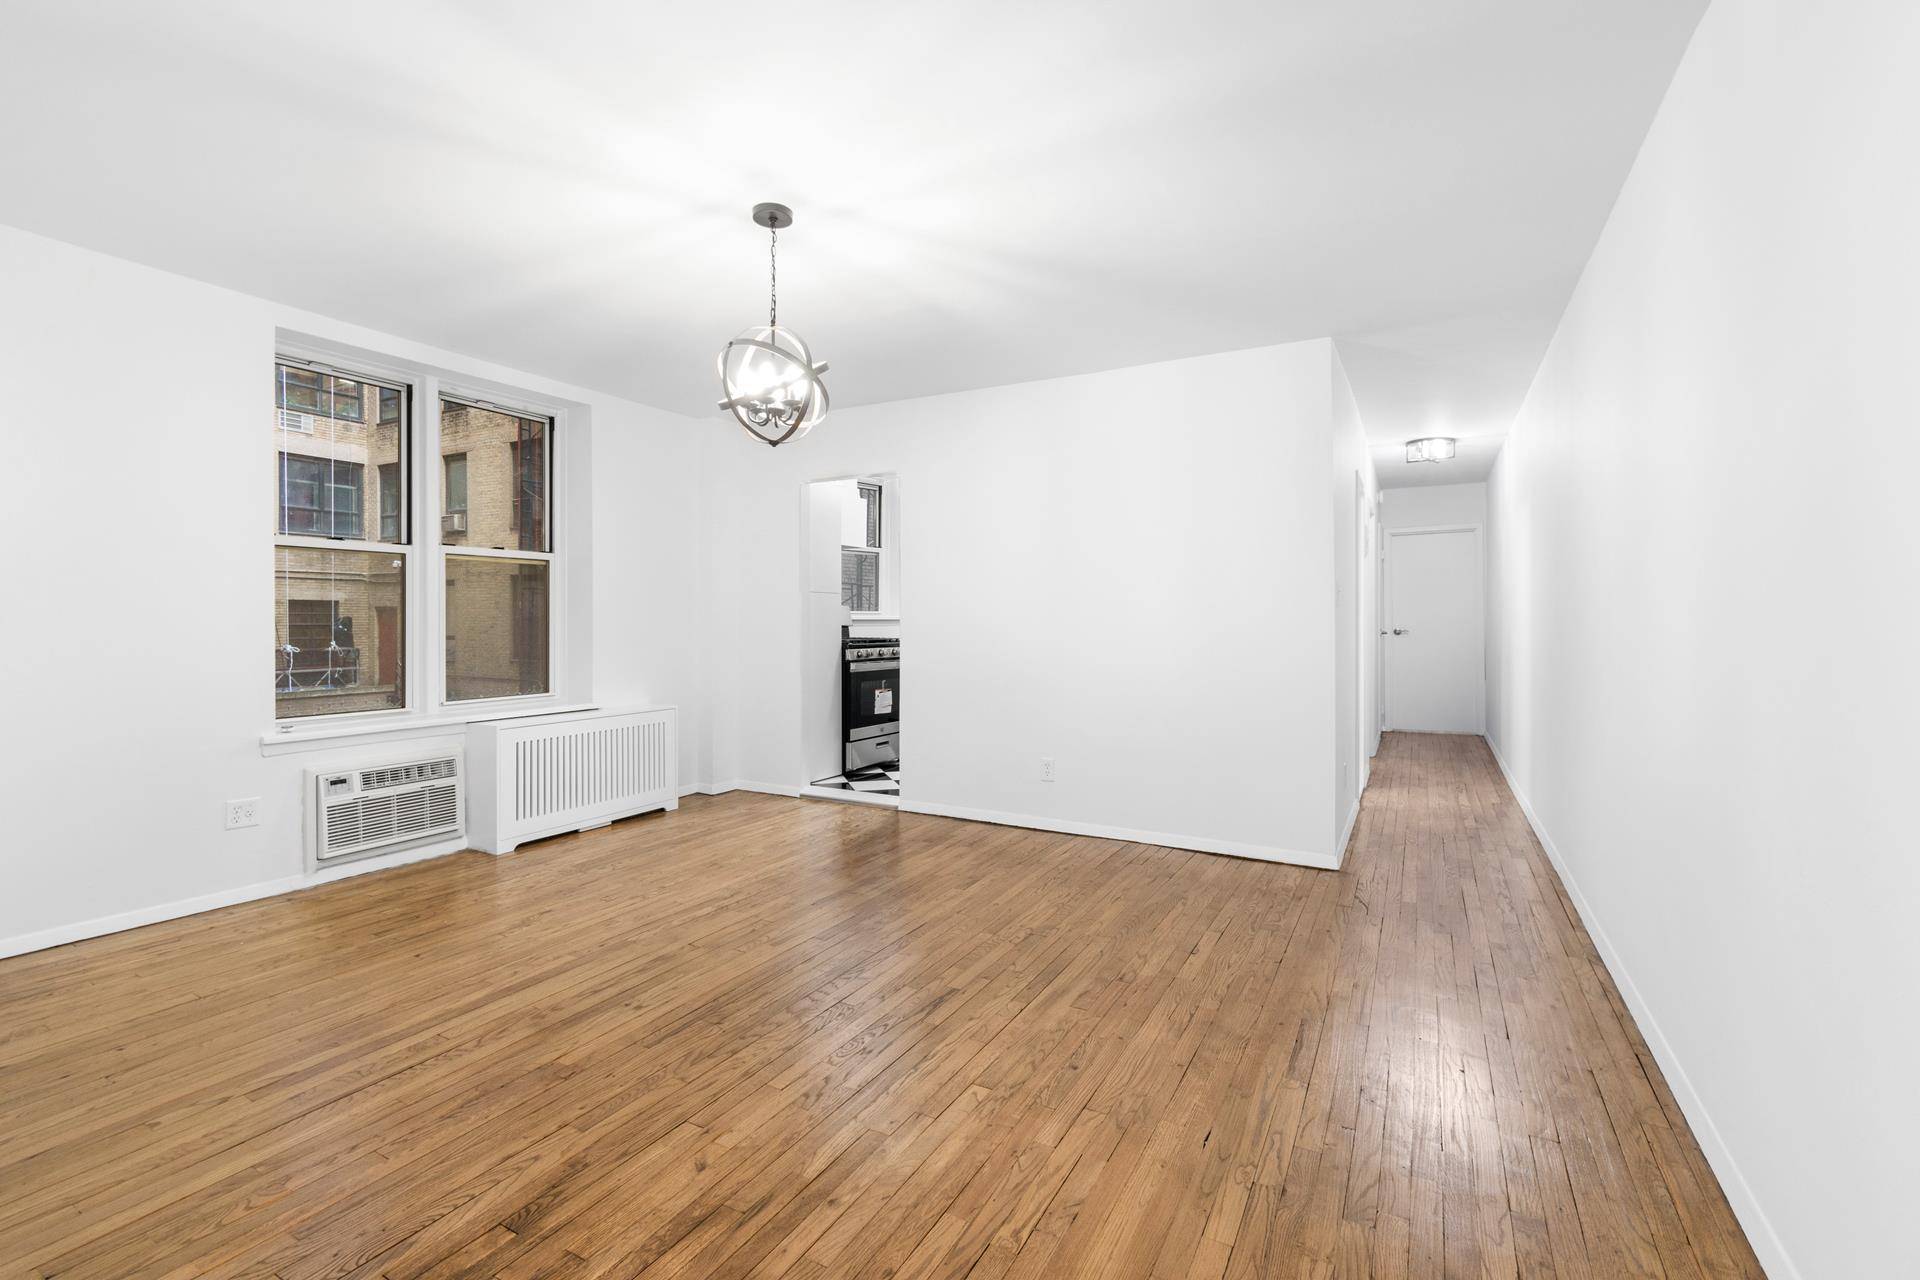 Be the first to live in this newly renovated and spacious two bedroom, one bath apartment.